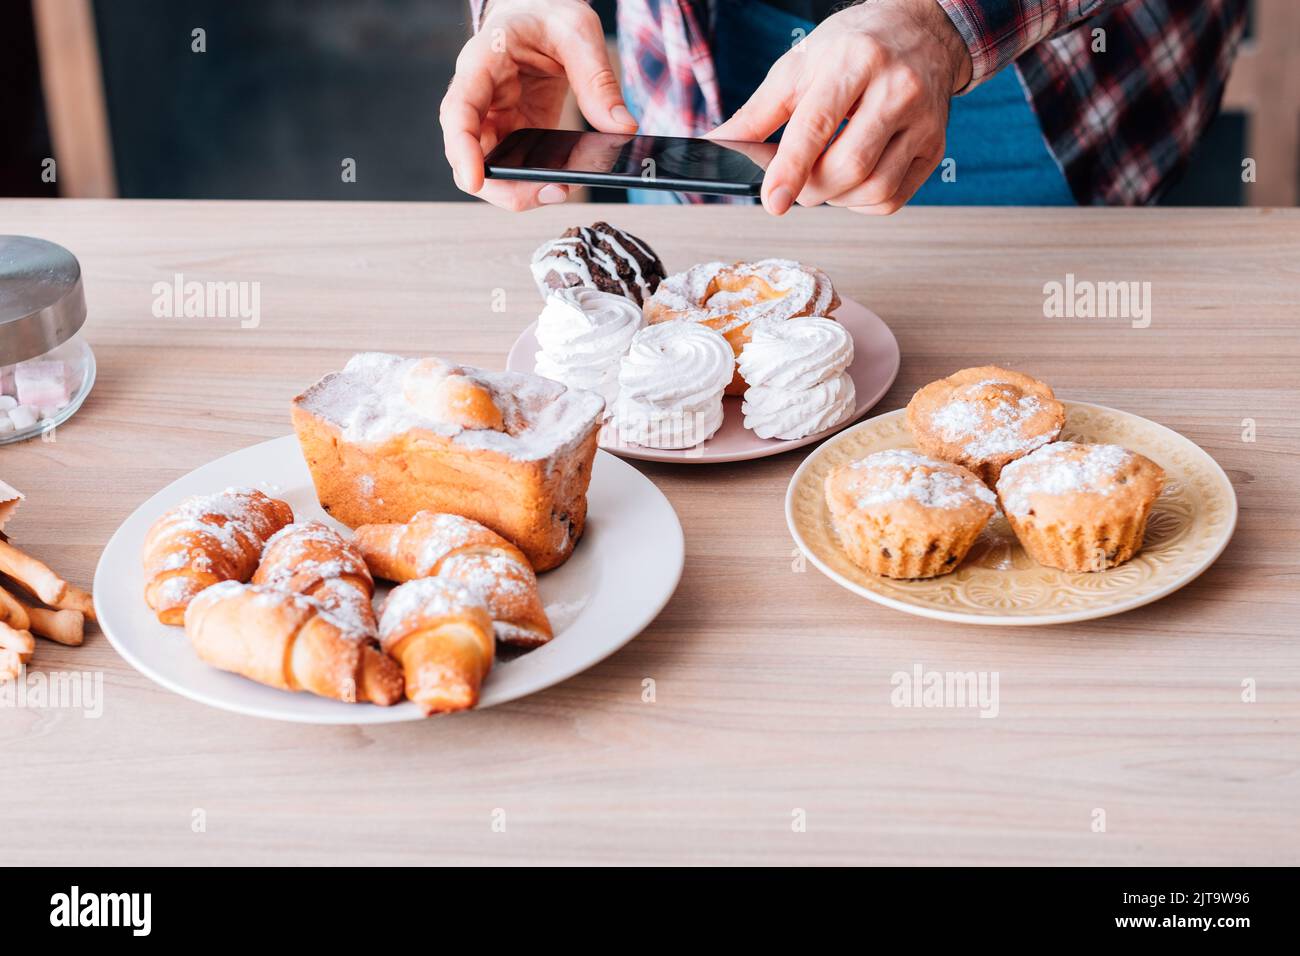 food blogging man hobby homemade cakes pastries Stock Photo